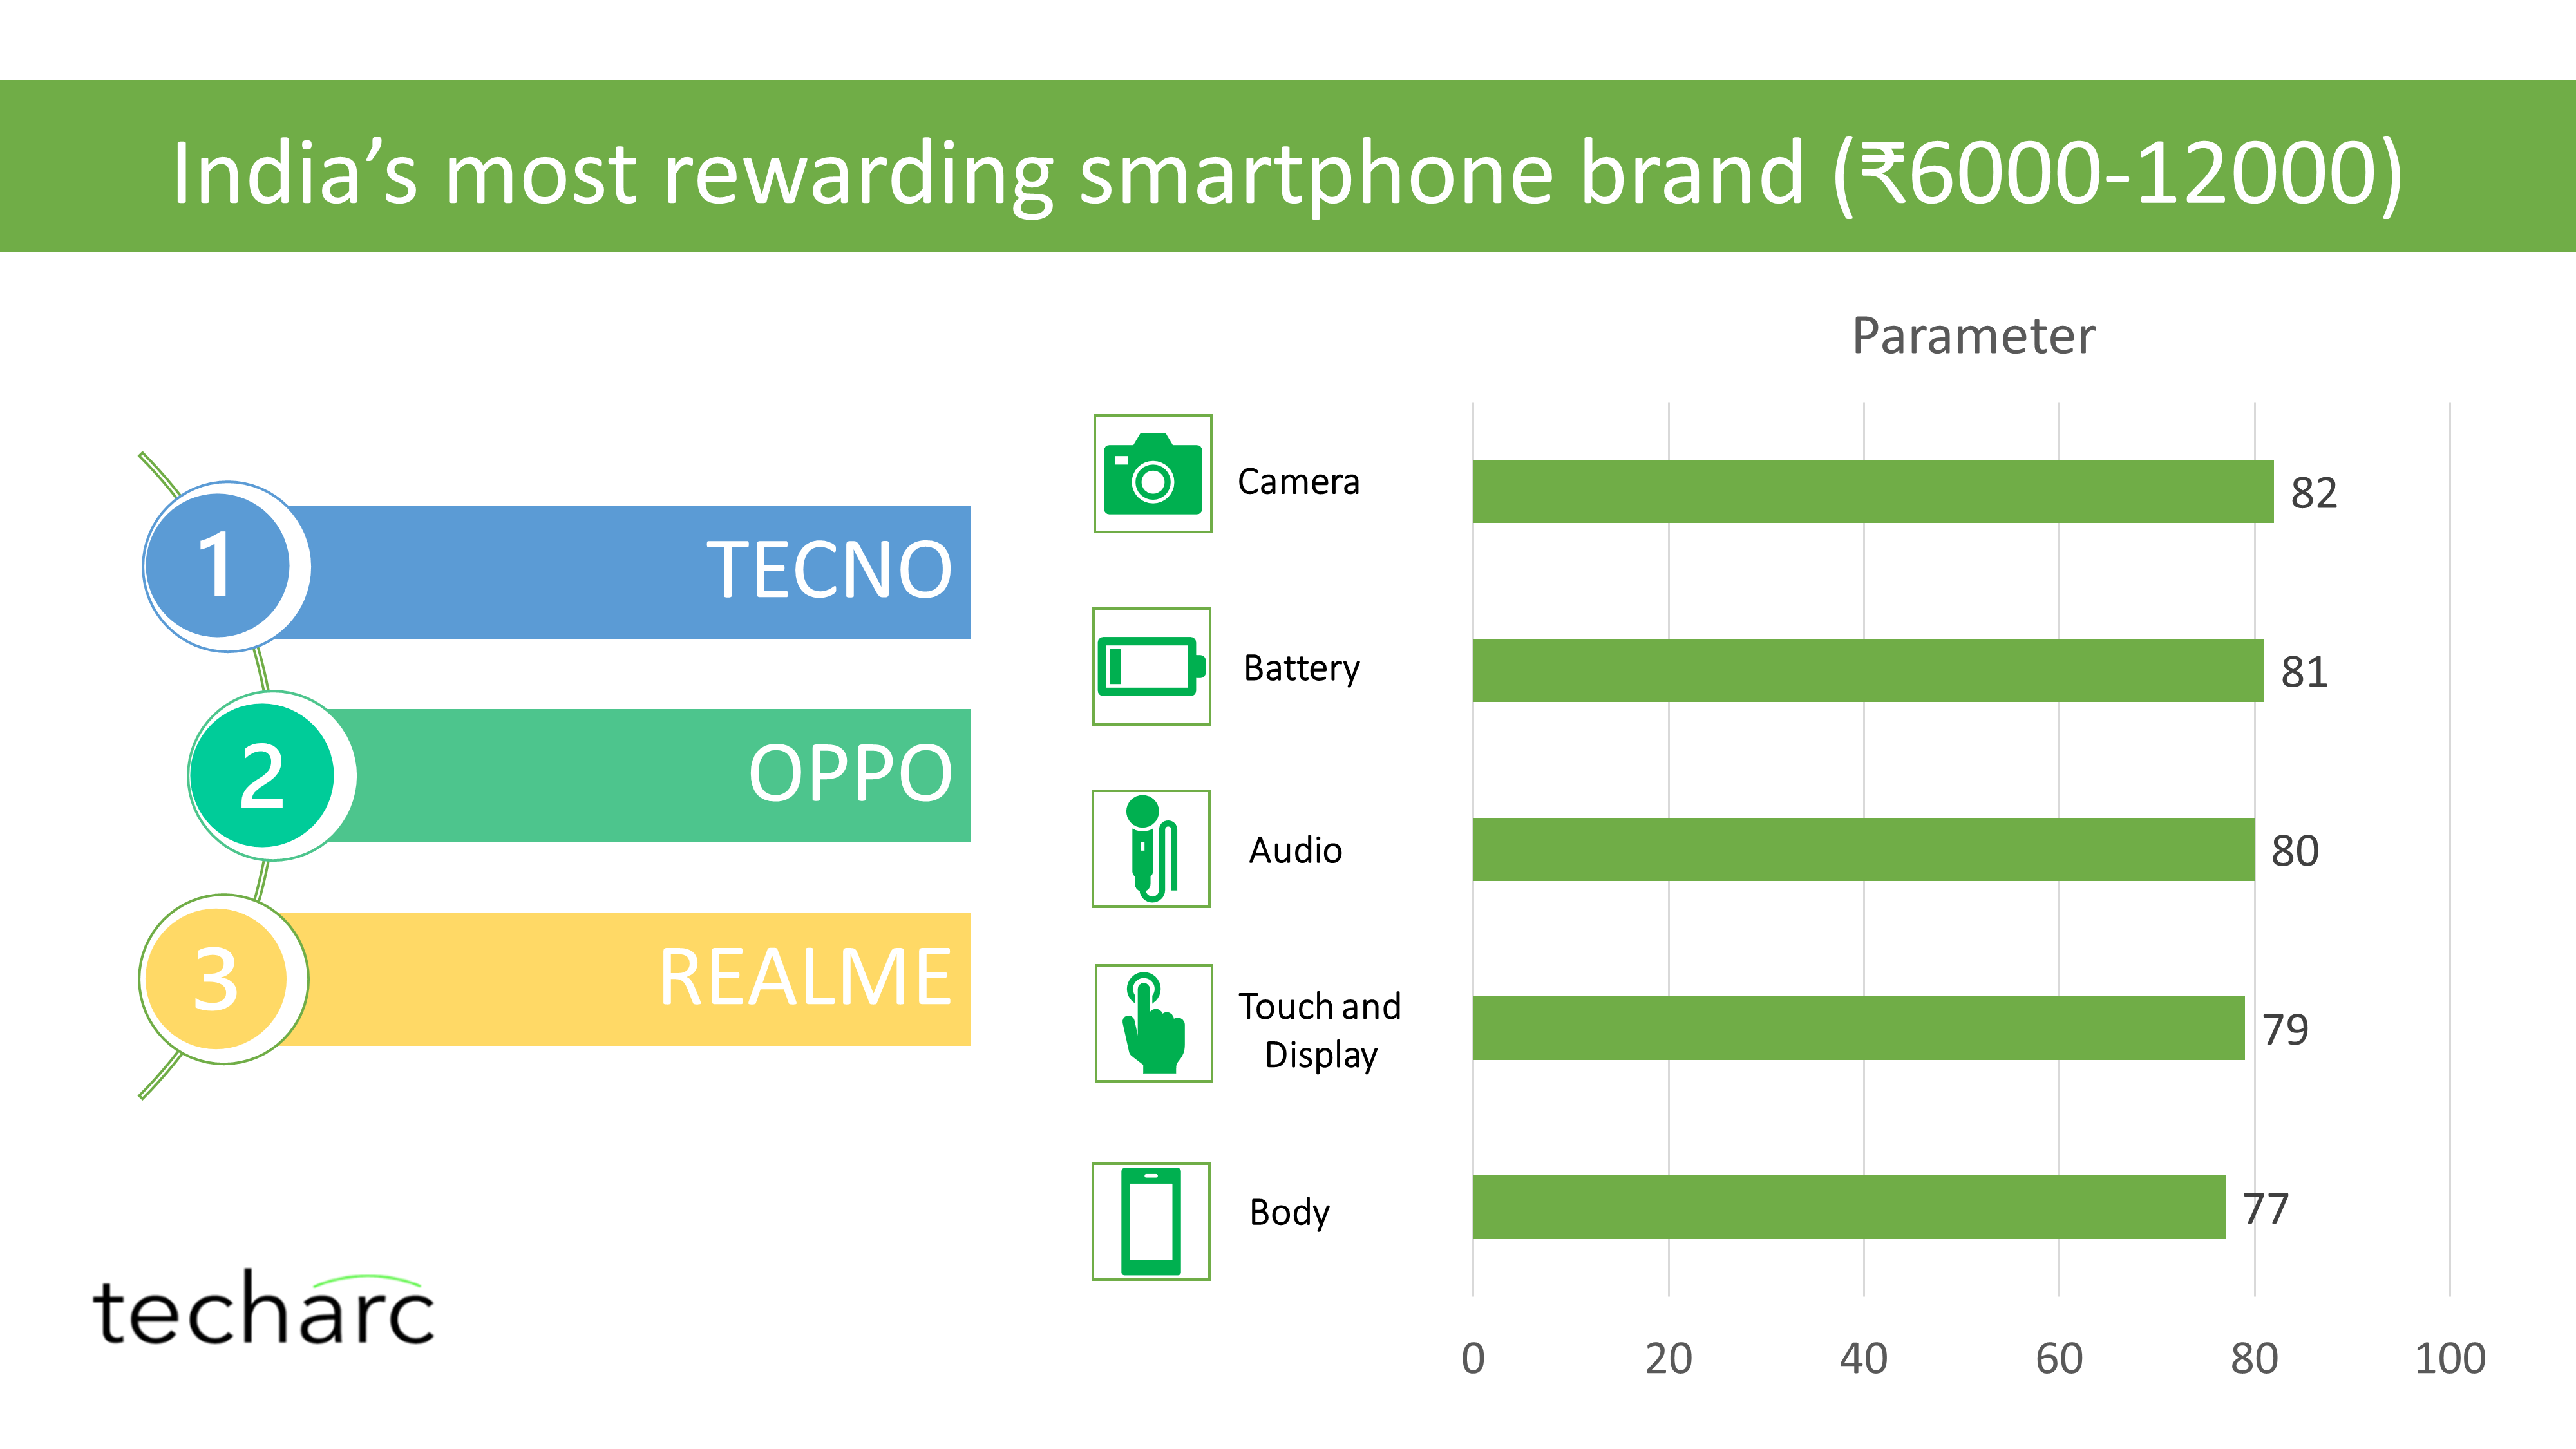 Owing to superior camera quality and battery performance, smartphone maker Tecno emerges as the ‘most rewarding smartphone brand’ in Rs 6,000-12,000 segment in India.